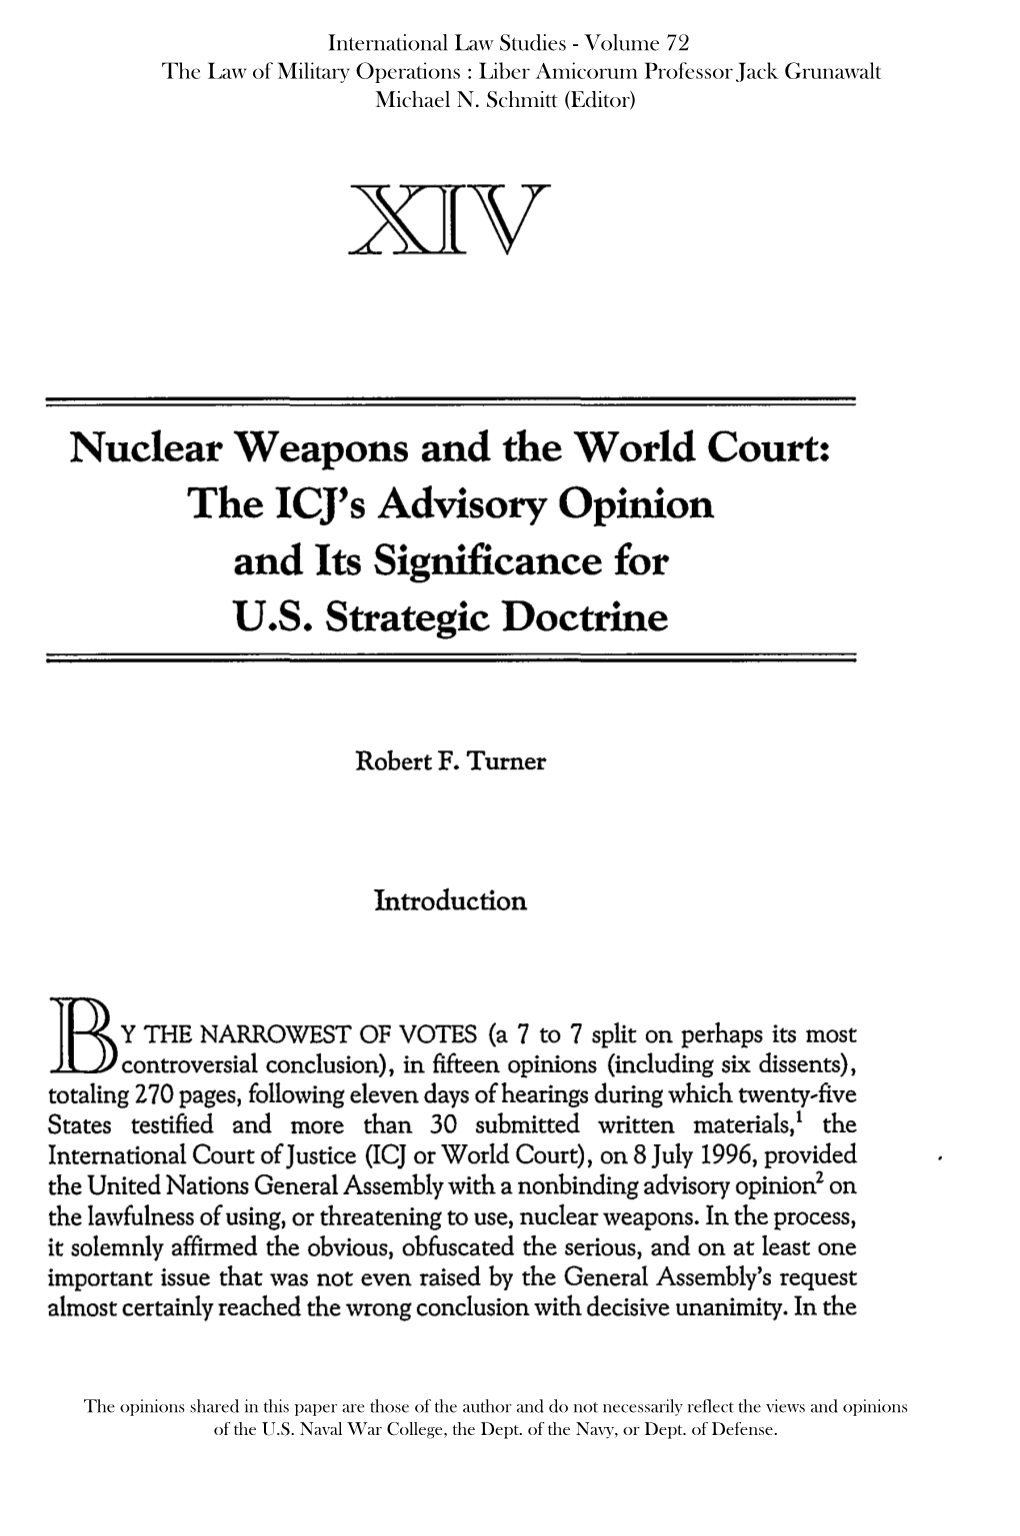 Nuclear Weapons and the World Court: the ICJ's Advisory Opinion and Its Significance for U.S